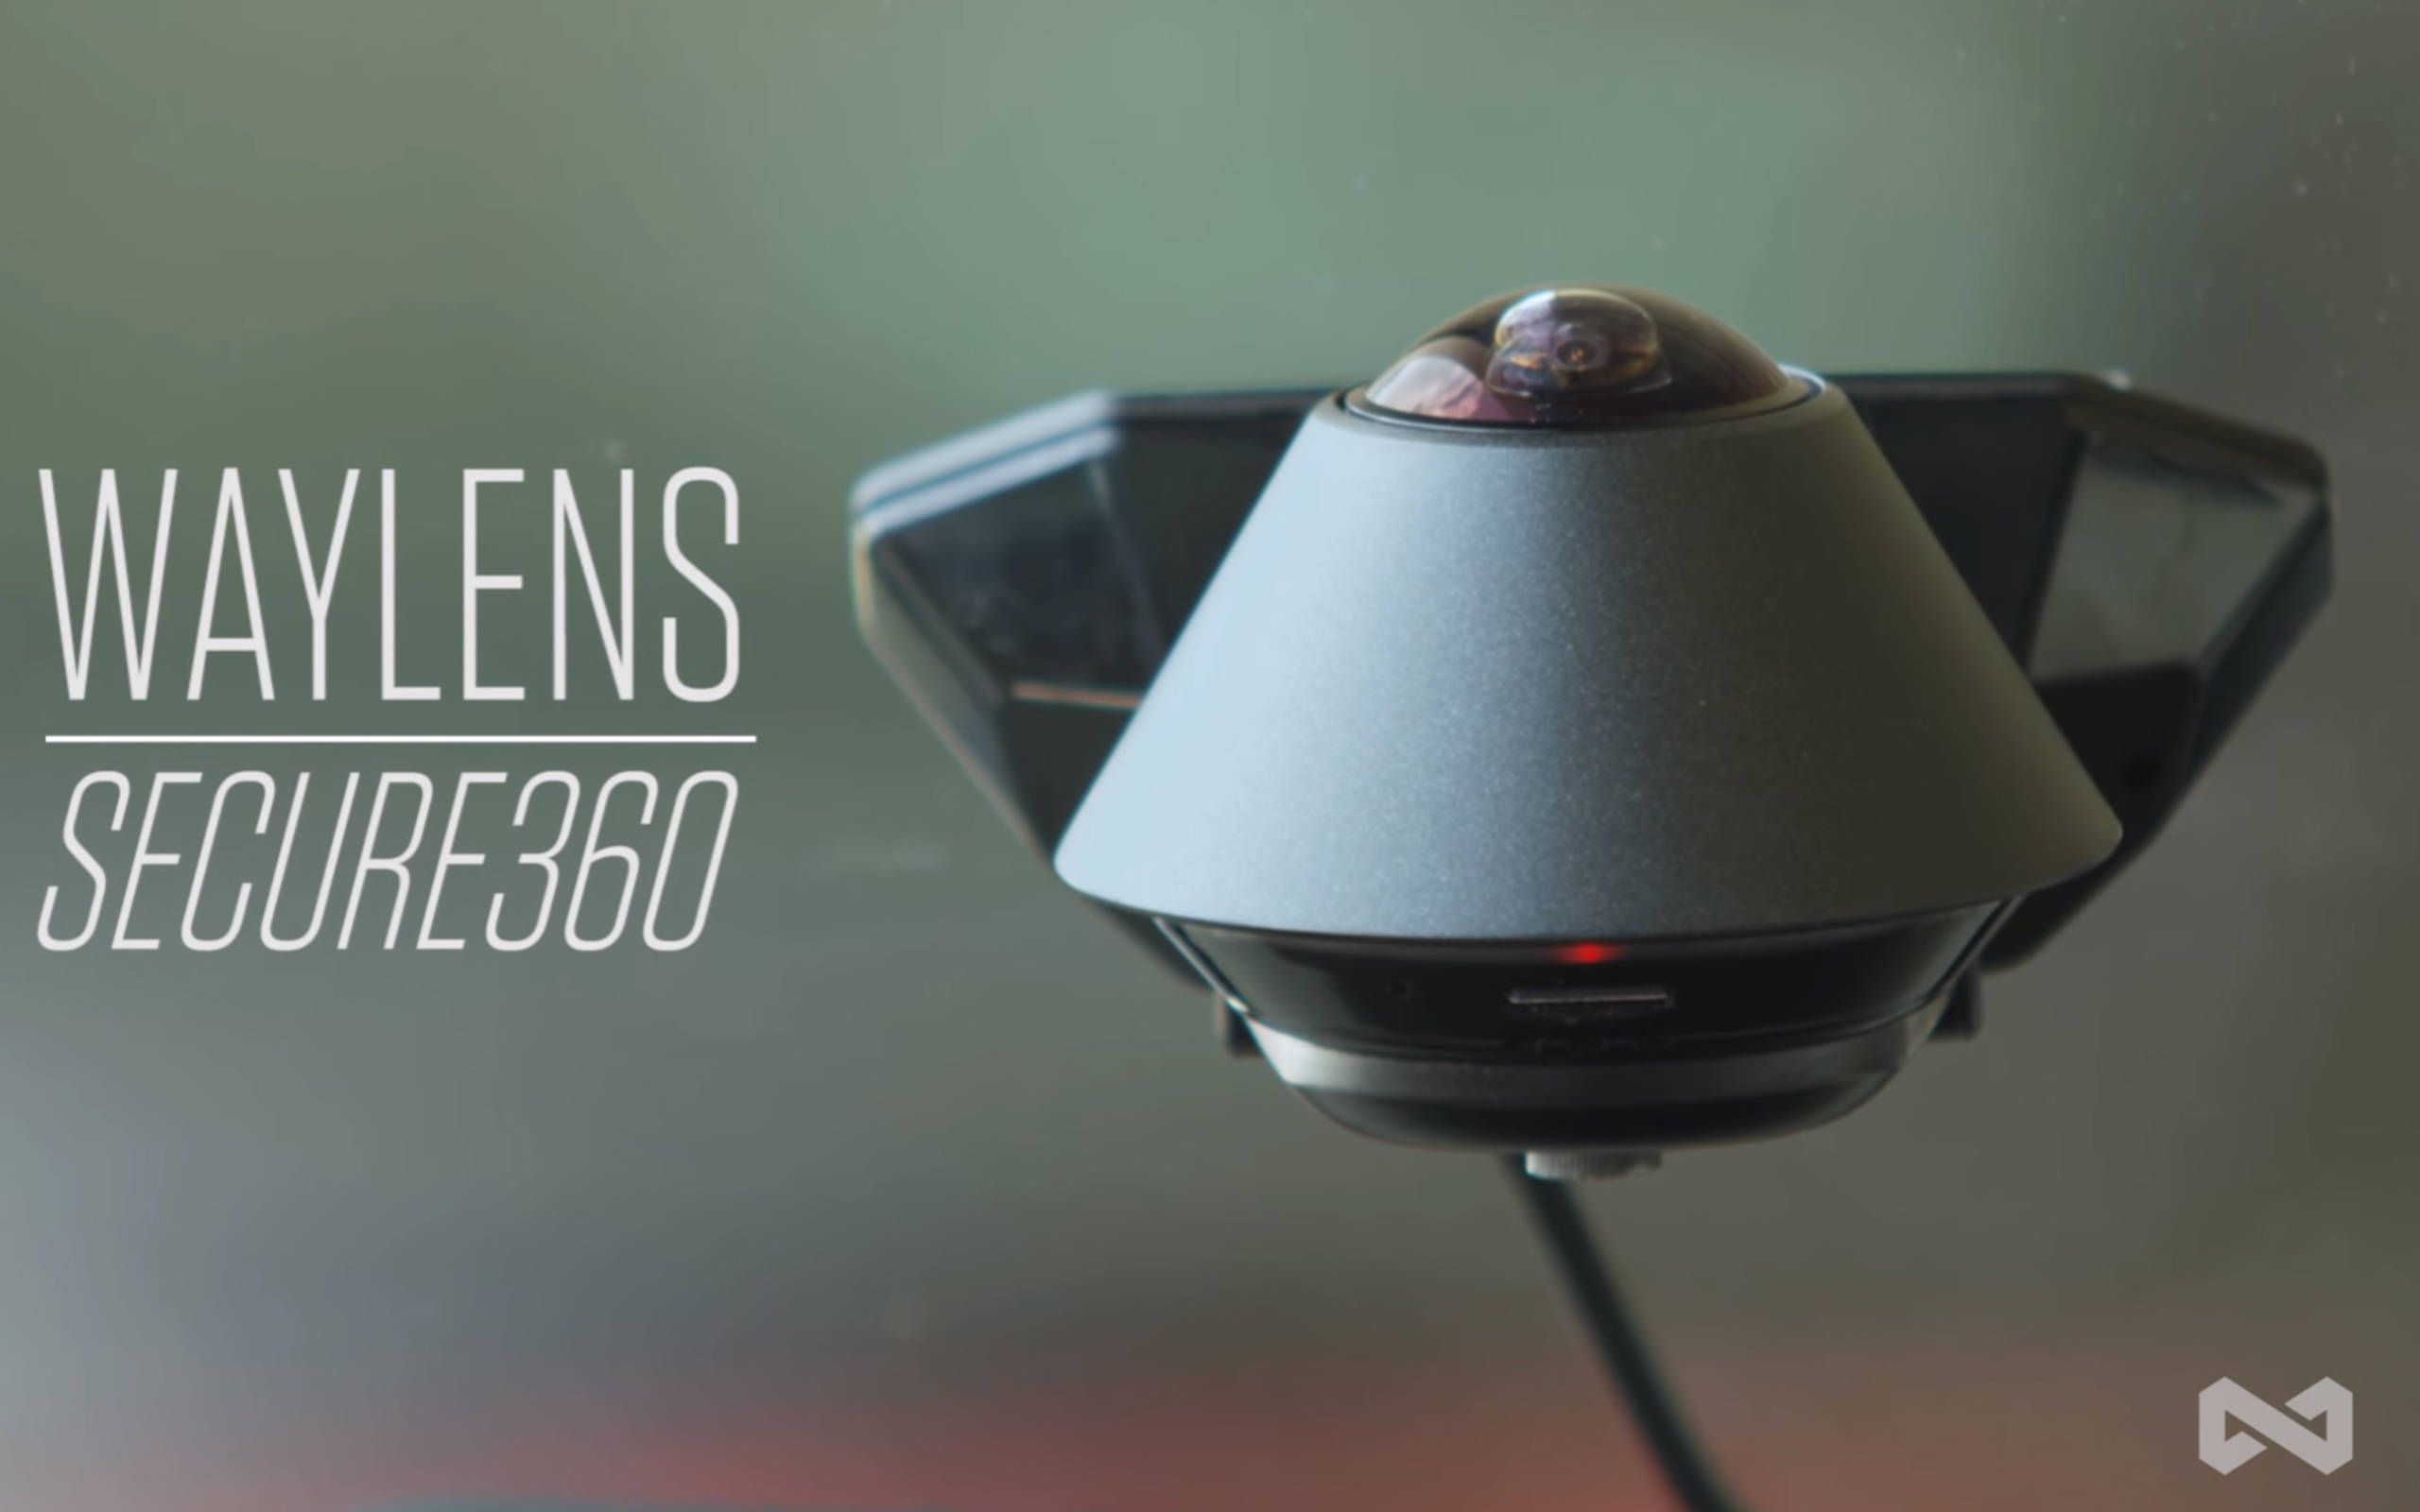 Waylens 360 dashcam is live: Donations get a discounted camera